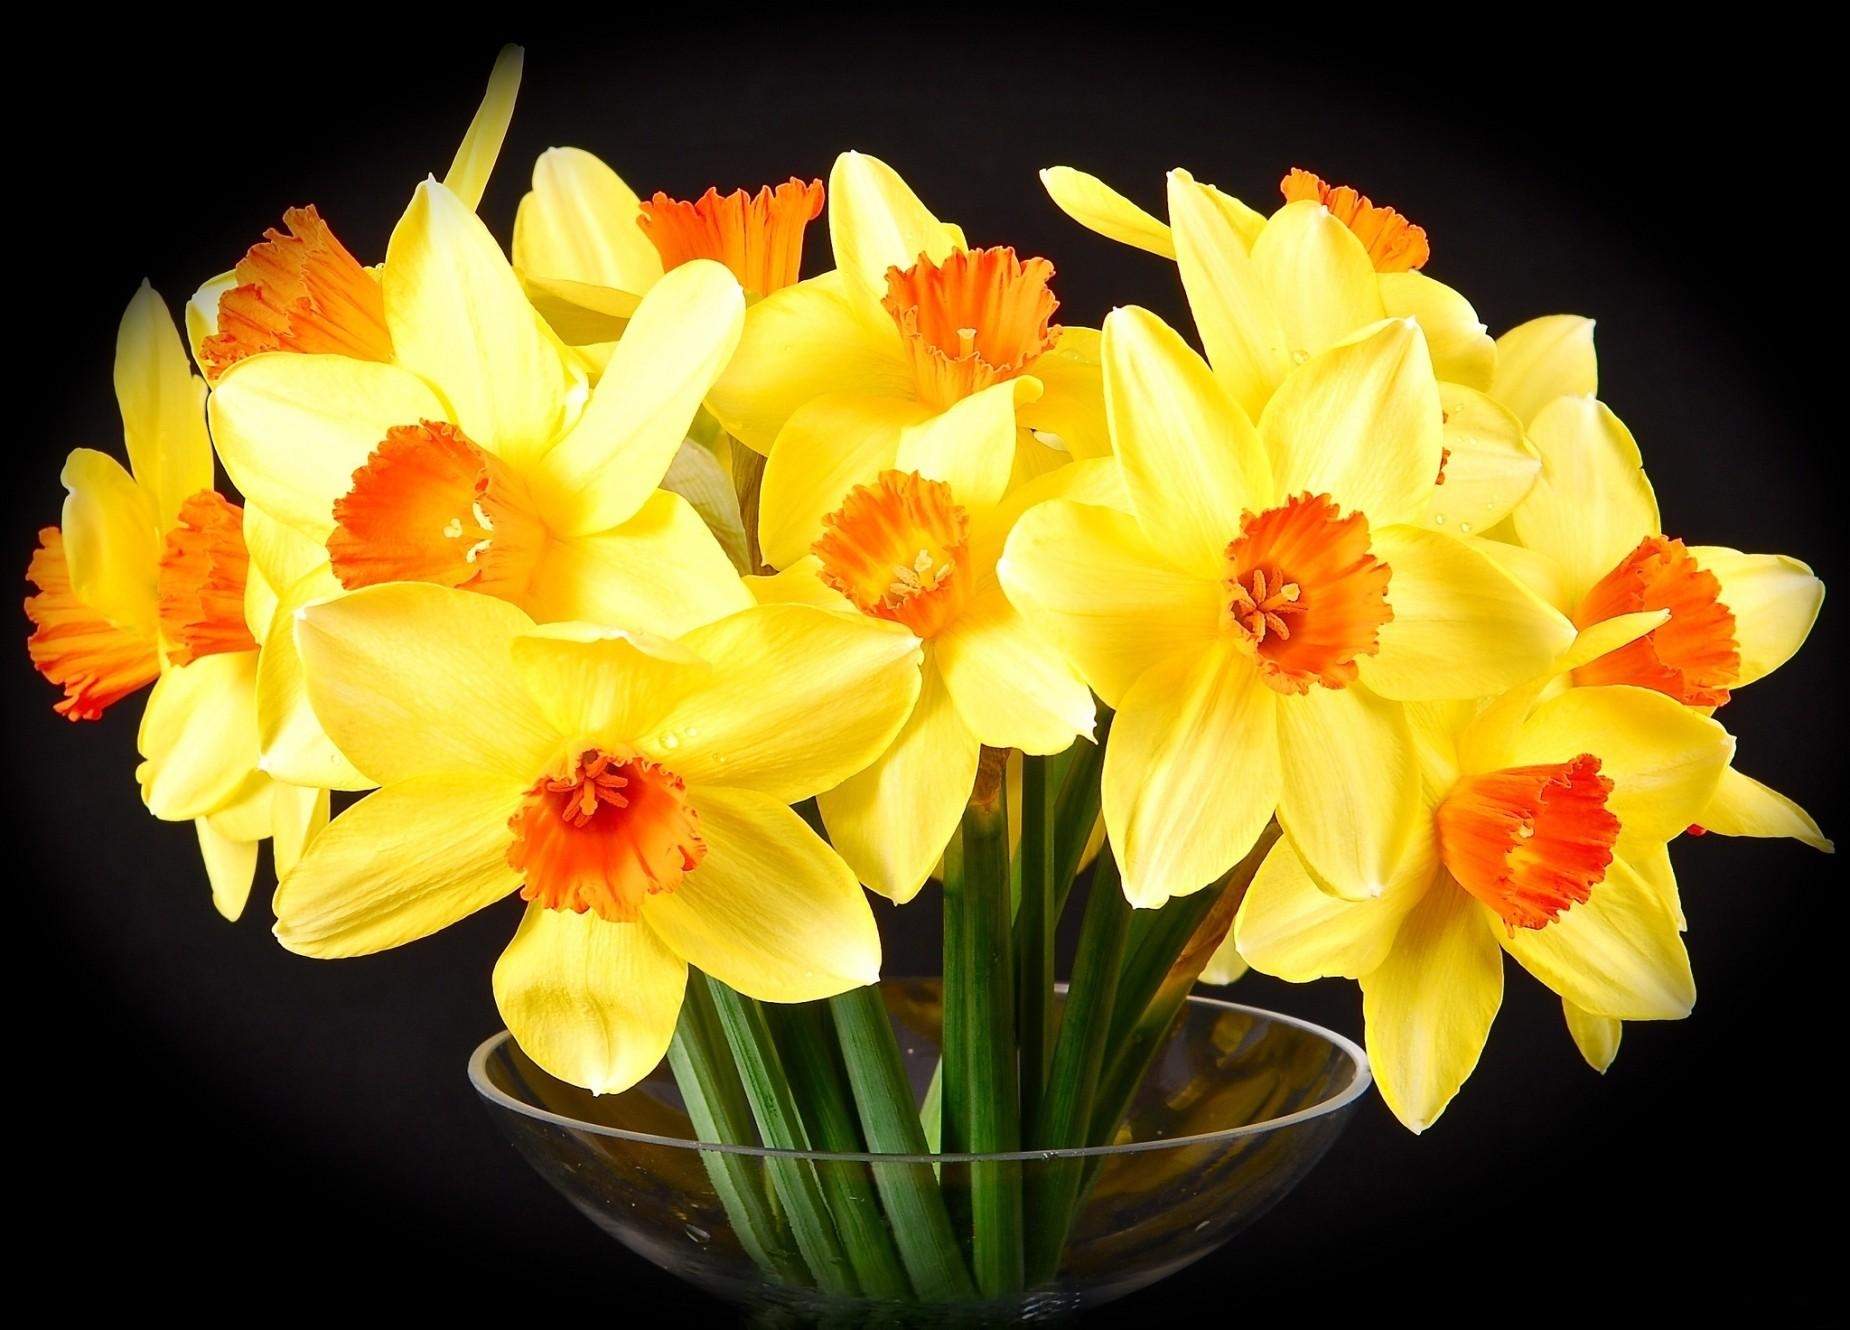 Wallpaper, daffodils, flowers, spring, bright, yellow, cup 1850x1330